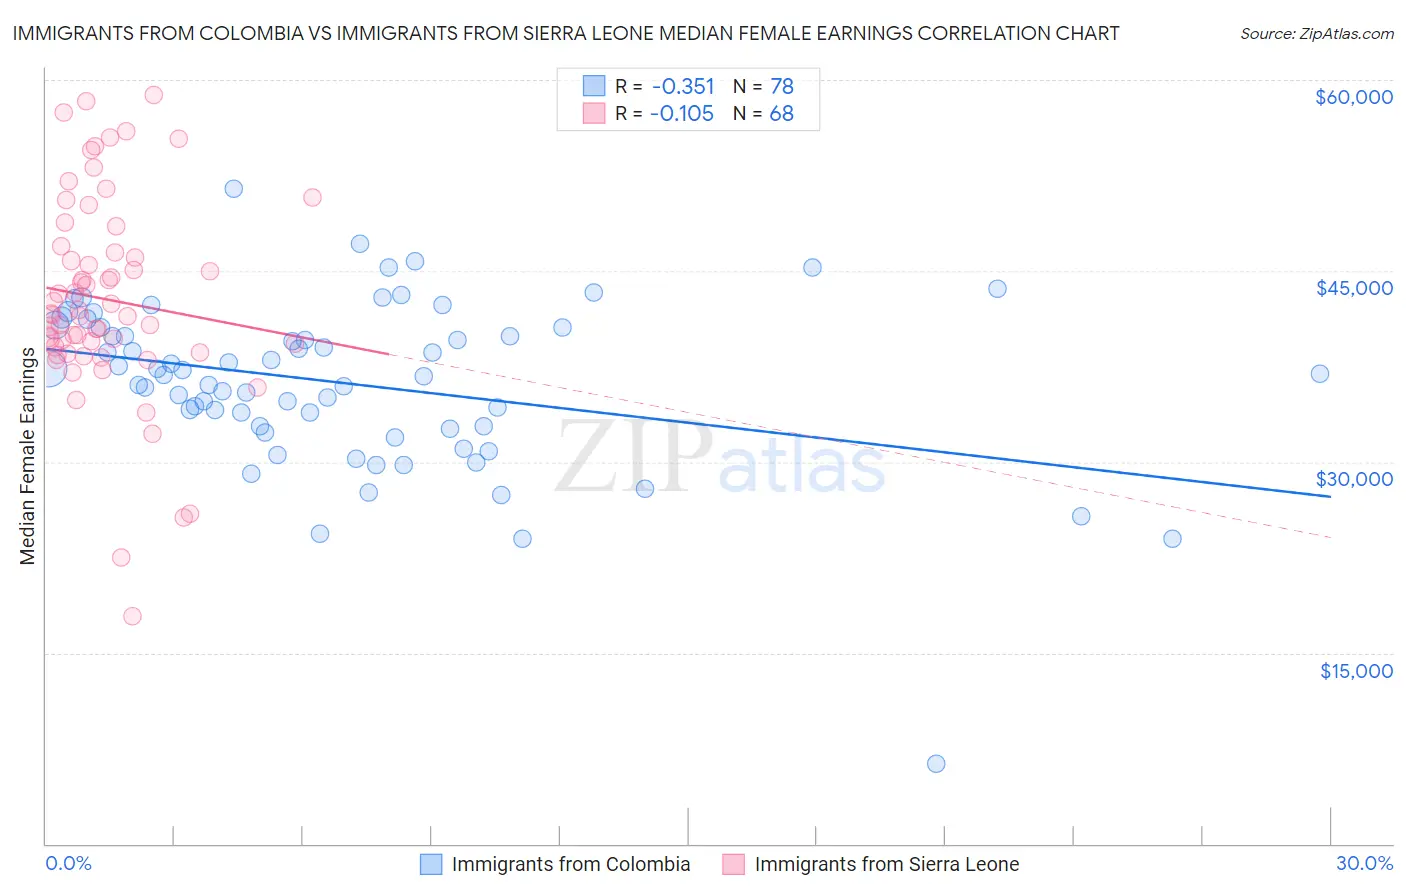 Immigrants from Colombia vs Immigrants from Sierra Leone Median Female Earnings